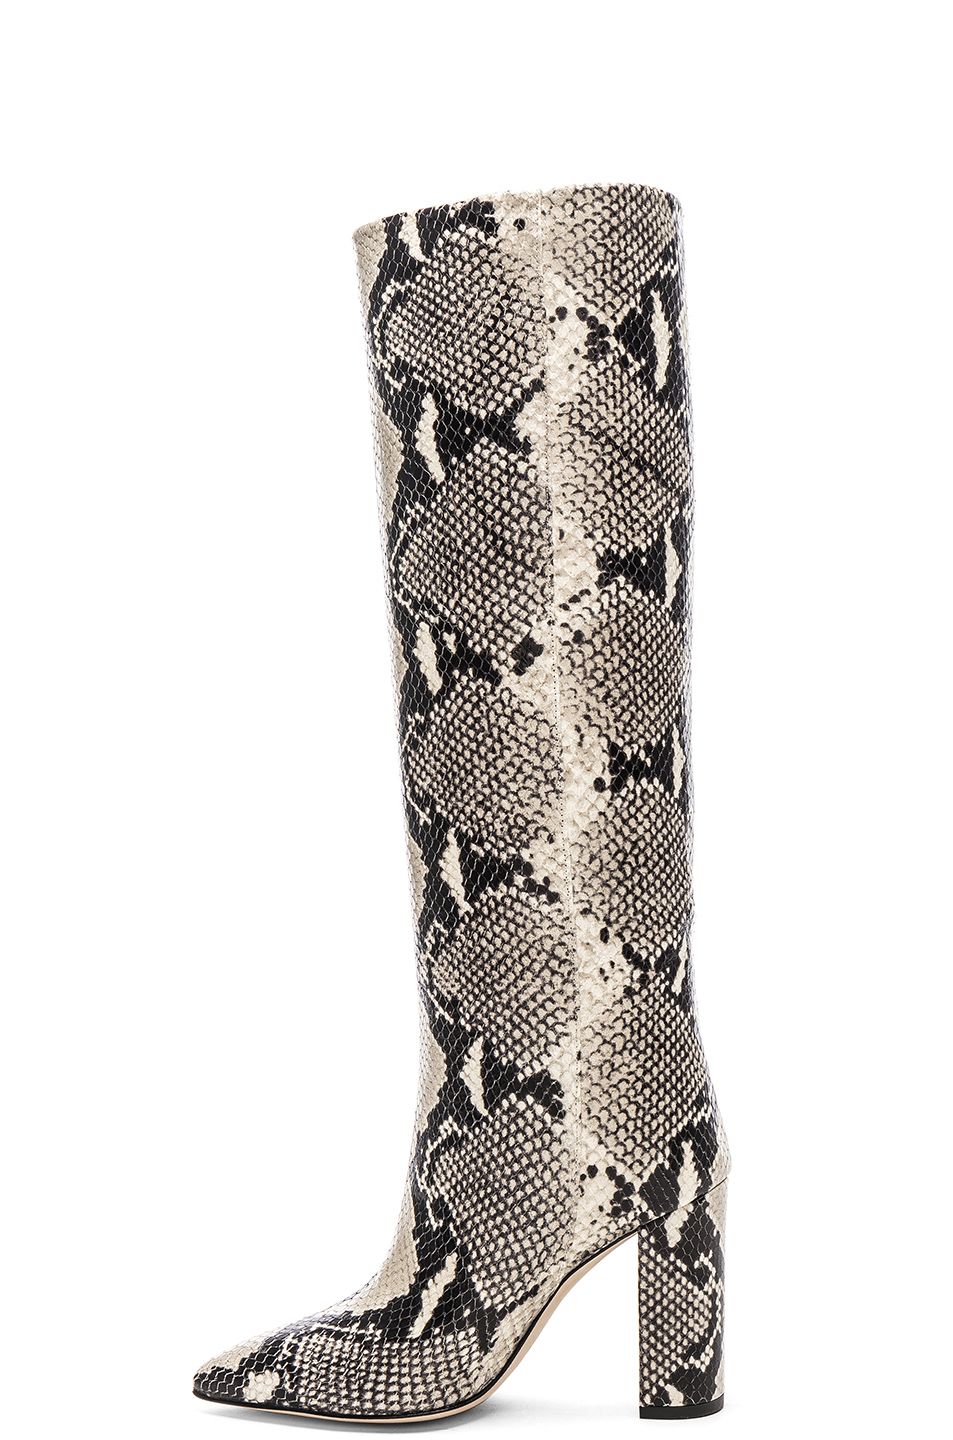 Shop the Snakeskin Print Trend We're Going All In On